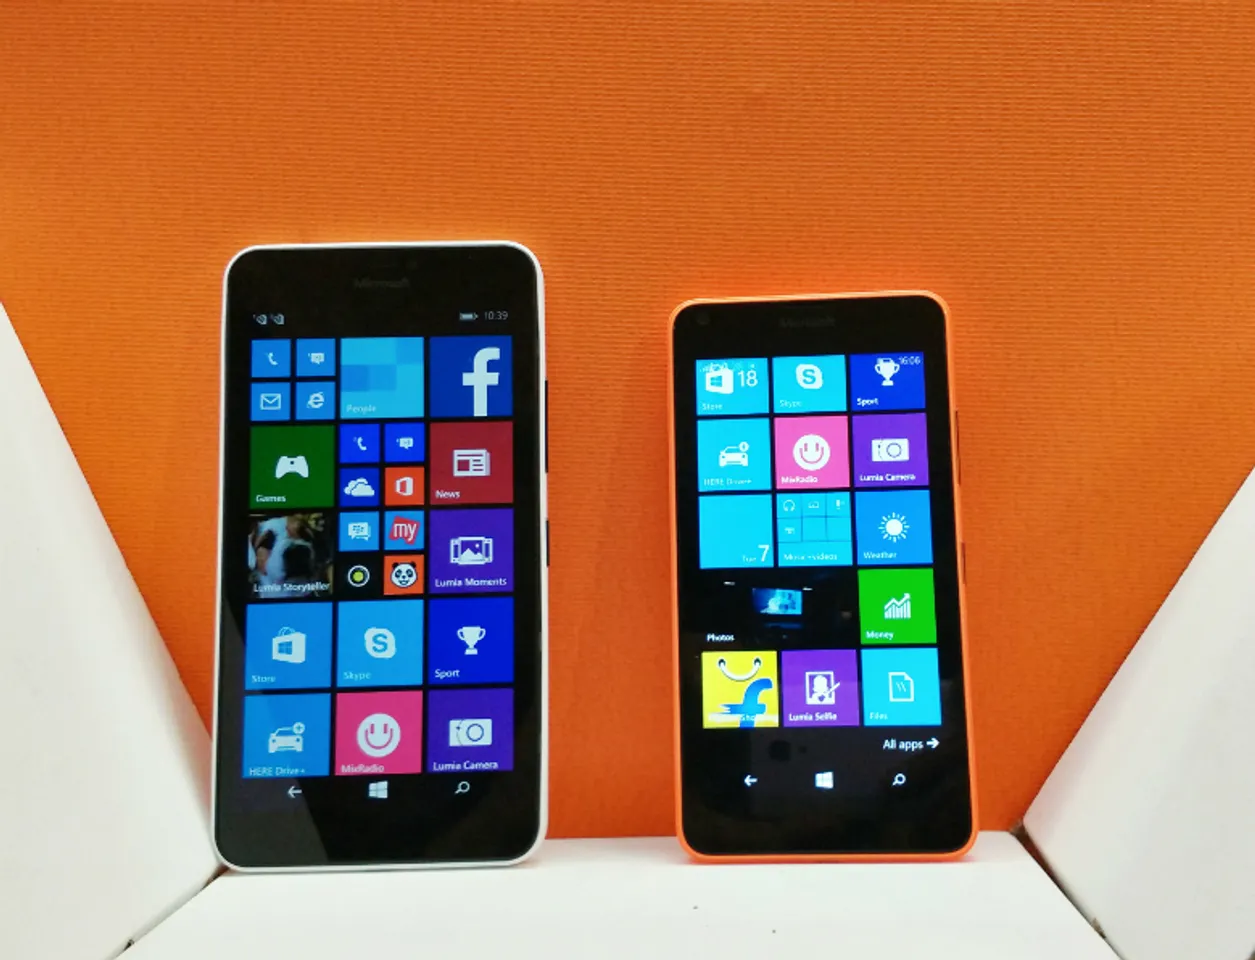 Microsoft launches Lumia 640 (Rs. 11,999) and Lumia 640 XL (Rs. 15,799) in India